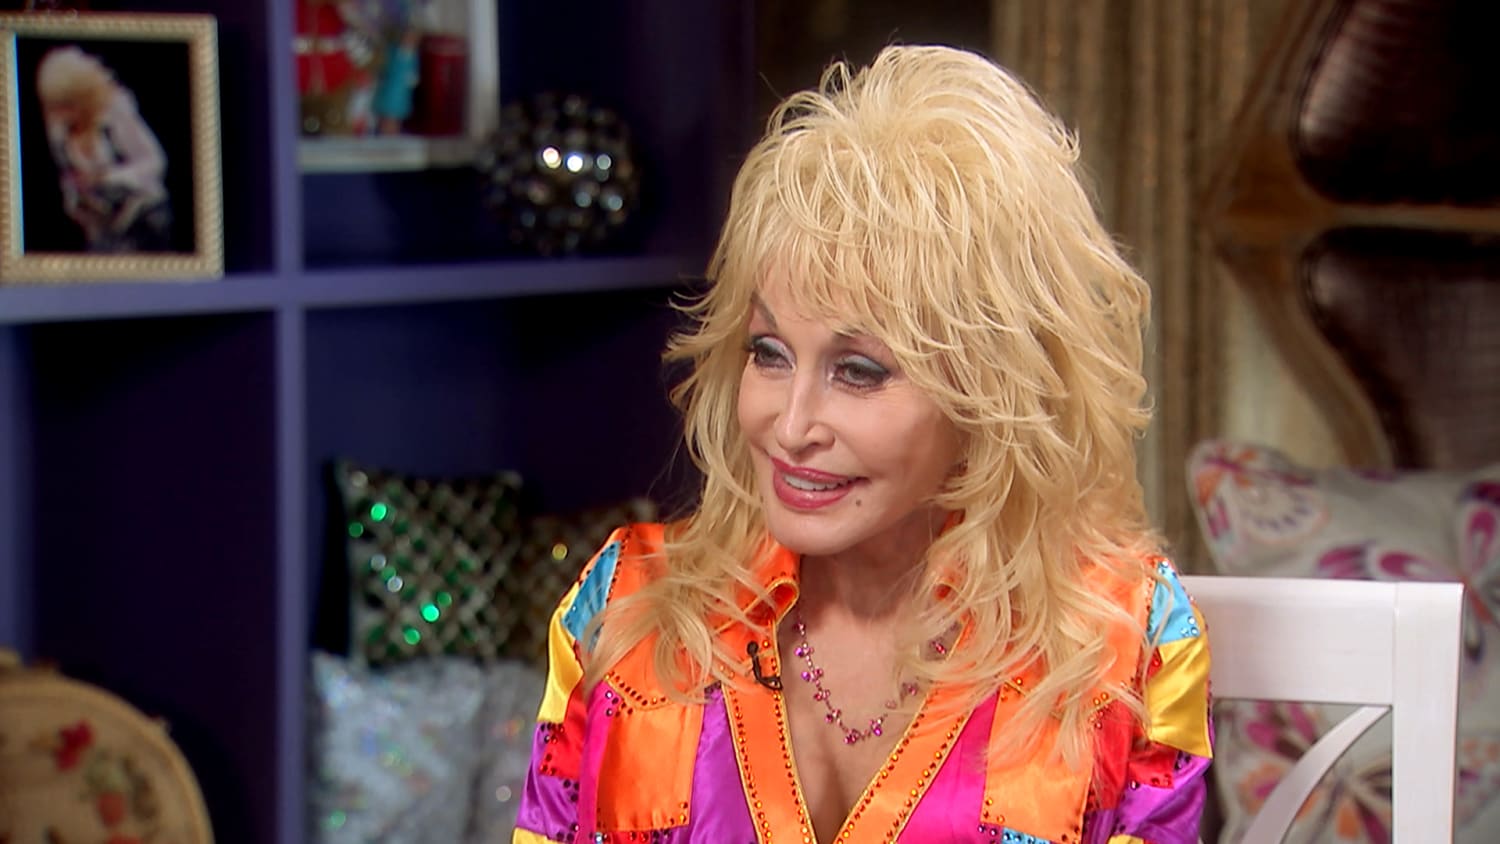 Dolly Parton on her childhood: 'We were rich in things that money don't buy' - TODAY.com1920 x 1080